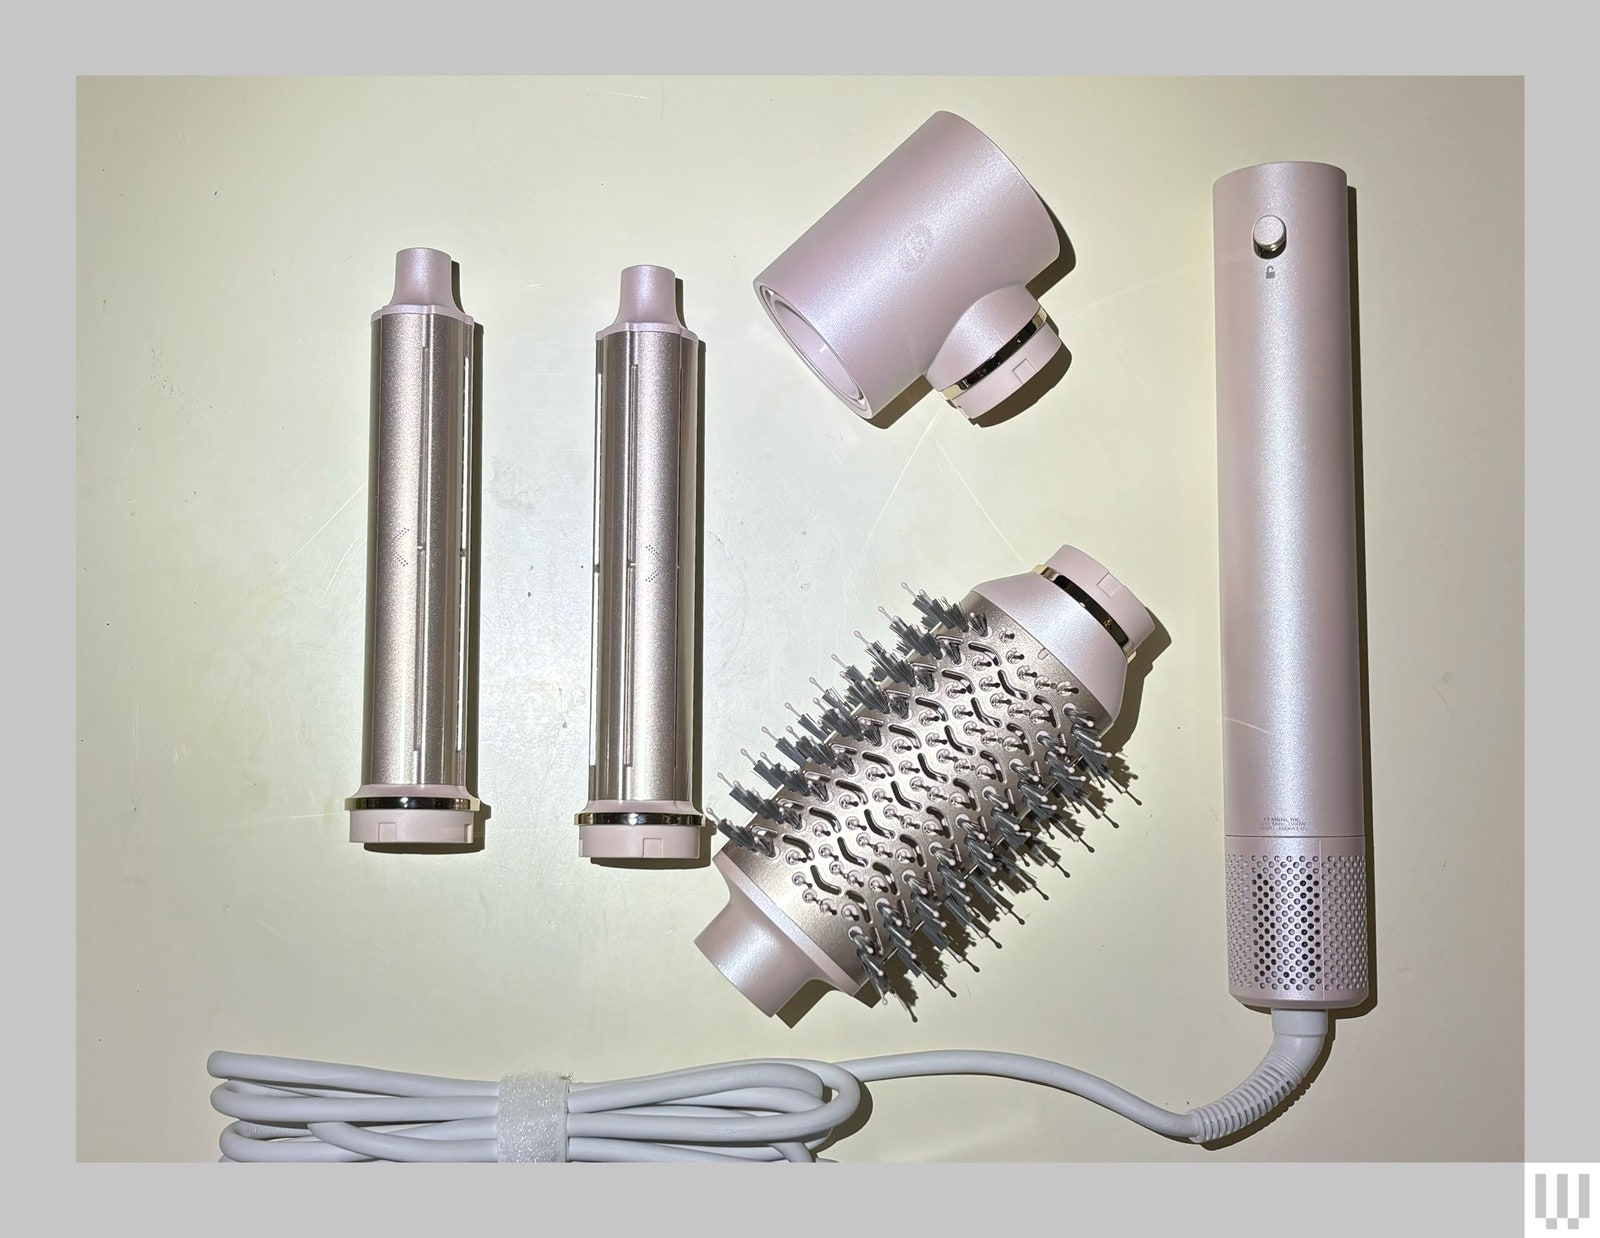 Attachments for a hair dryer including 2 curling rods a brush and handle with cord